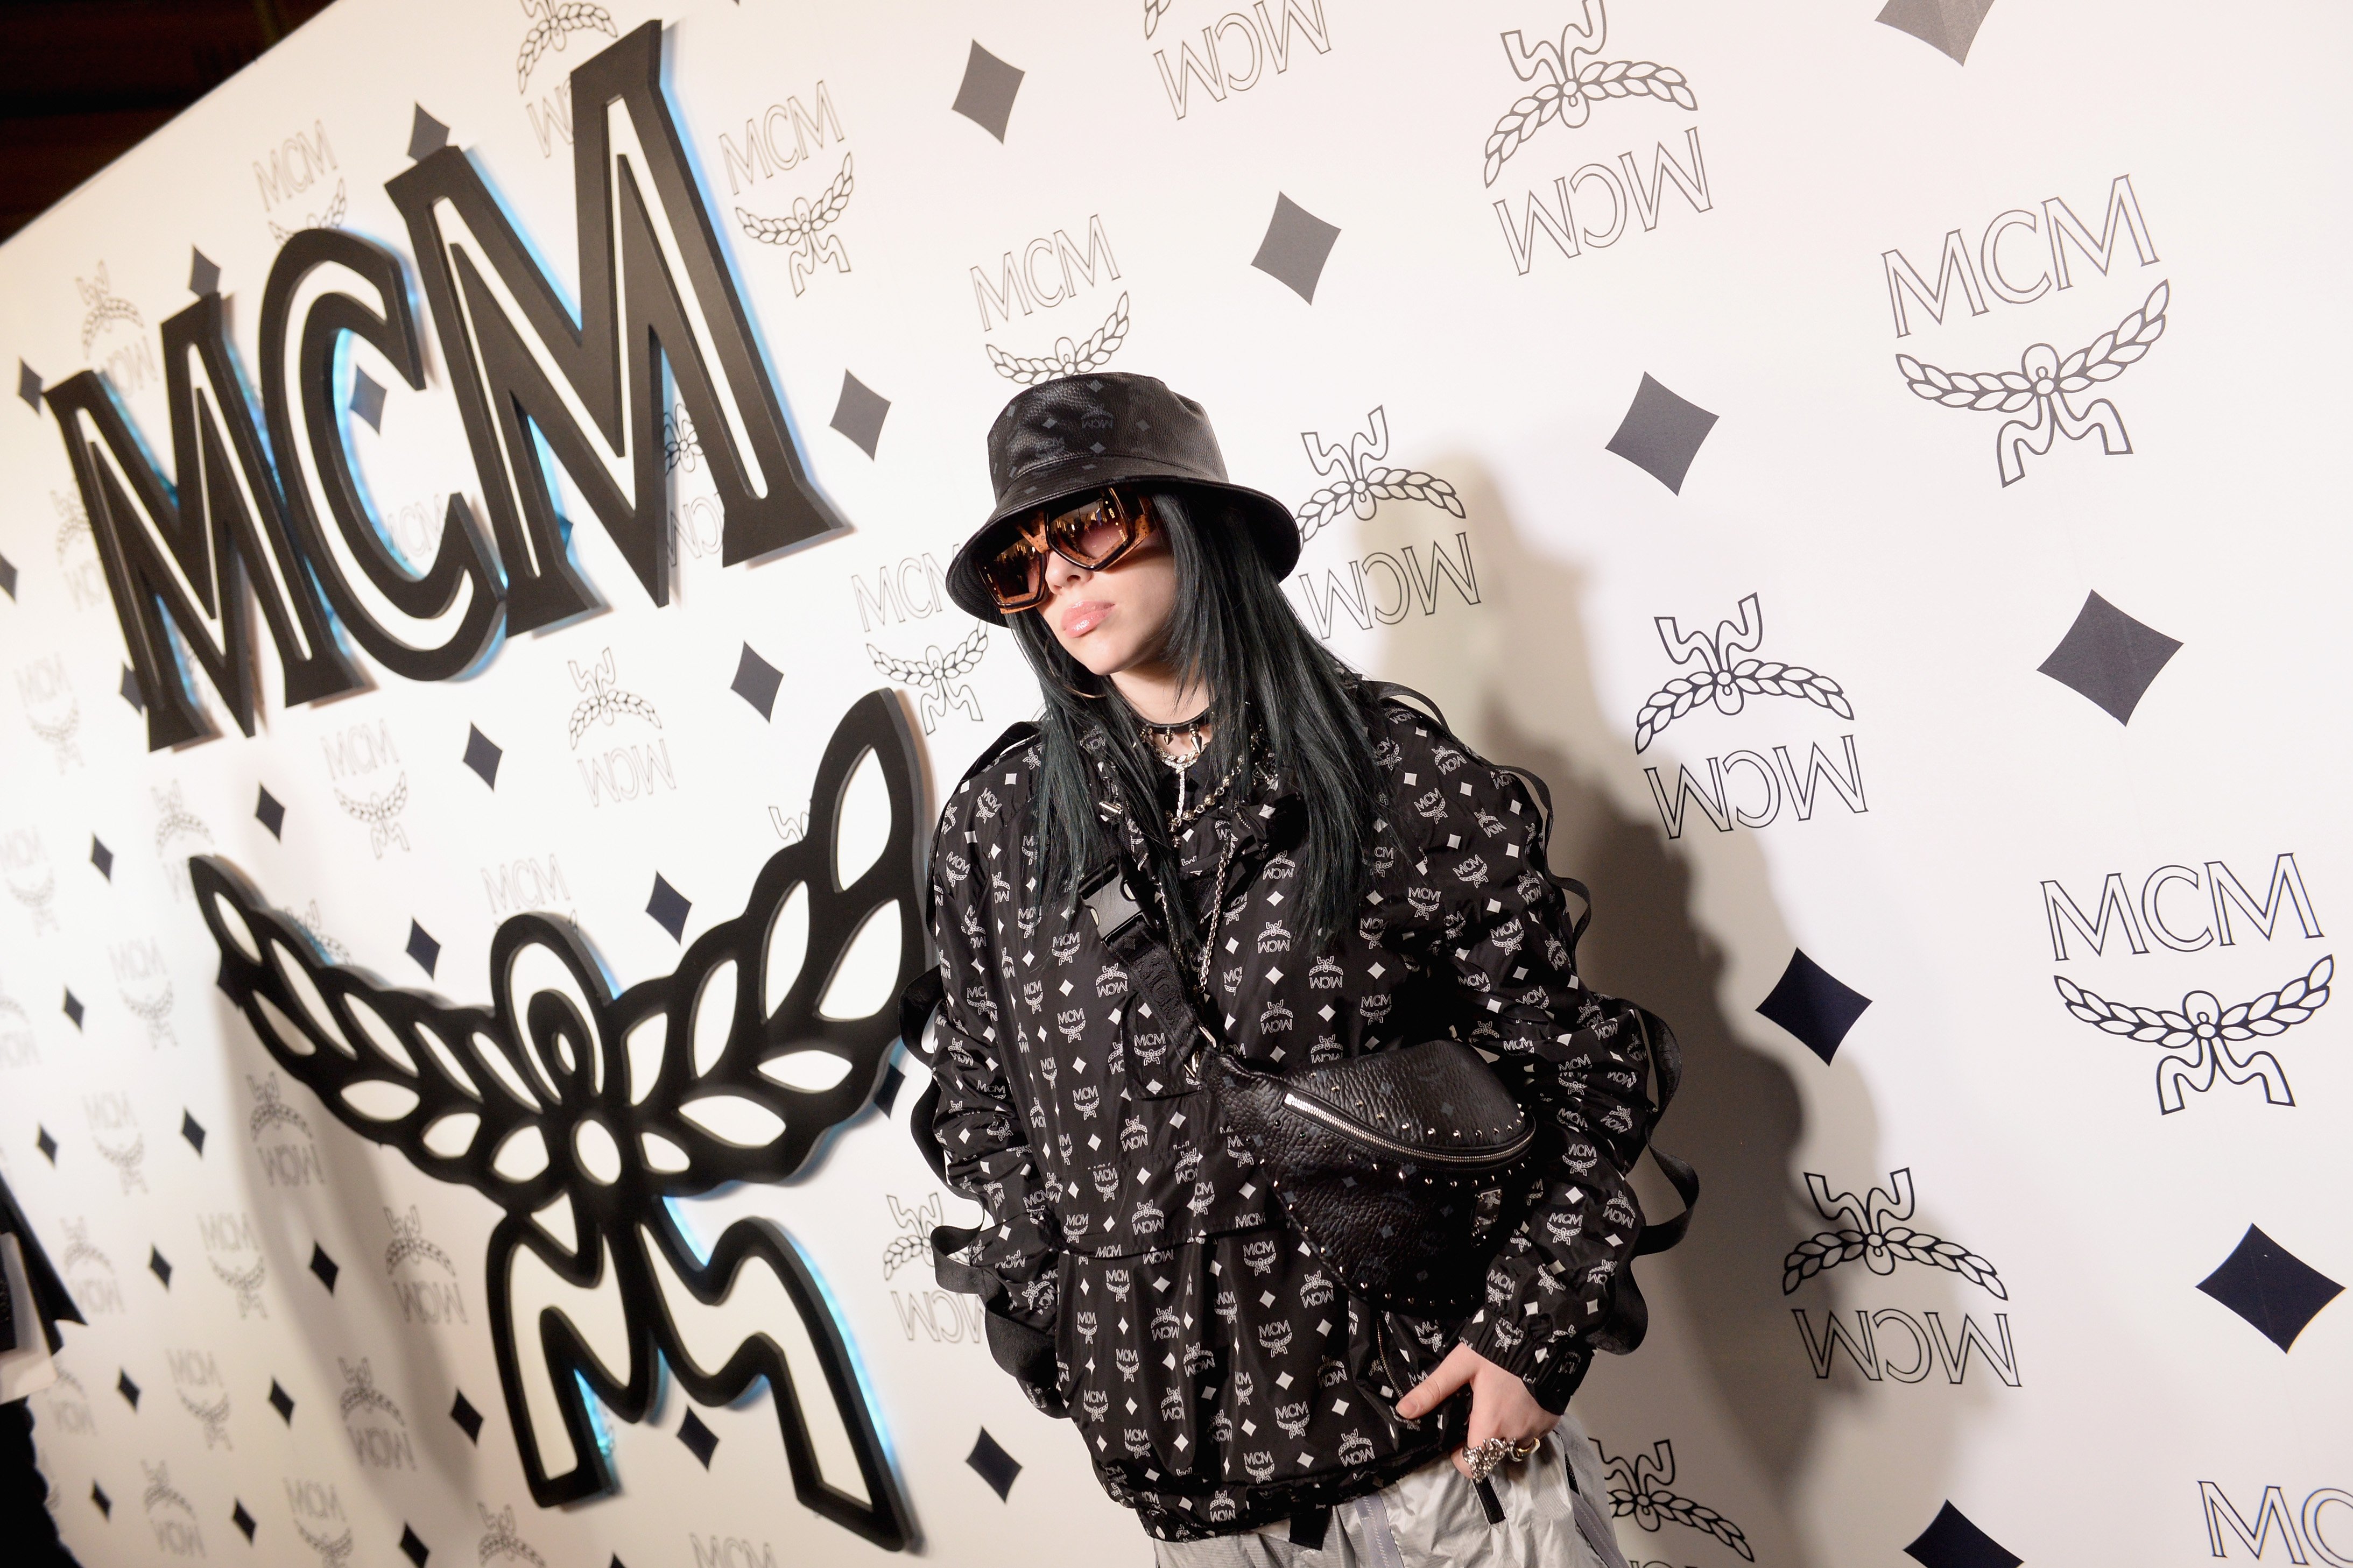 Billie Eilish attends the MCM Rodeo Drive Store Grand Opening Event at MCM Rodeo Drive on March 14, 2019 in Beverly Hills, California | Photo: GettyImages